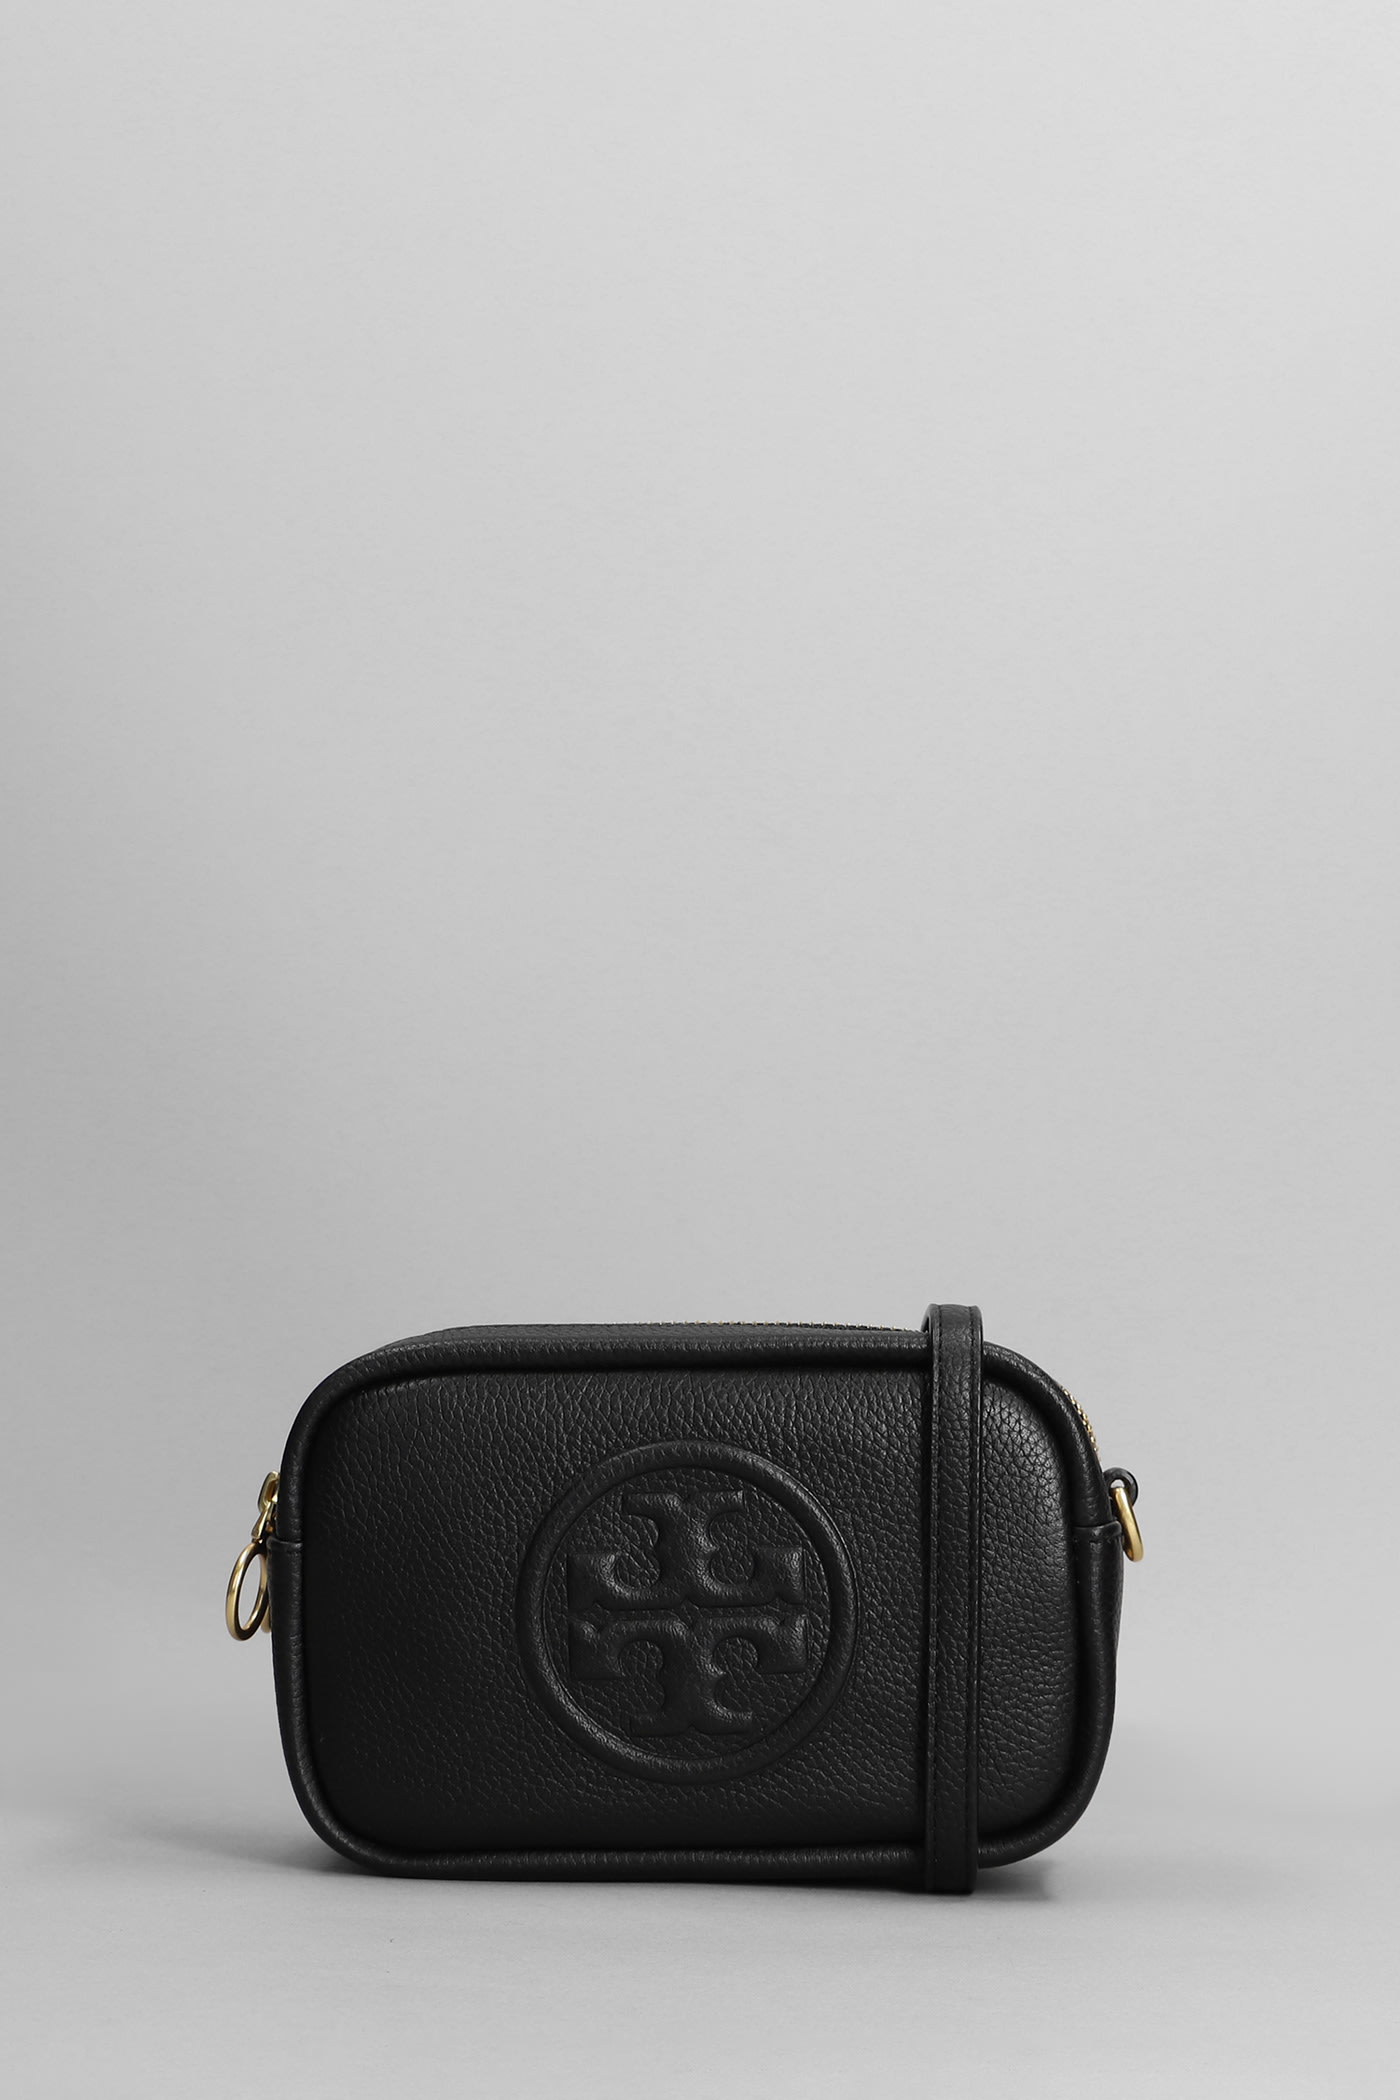 Tory Burch Perry Bombe Shoulder Bag In Black Leather